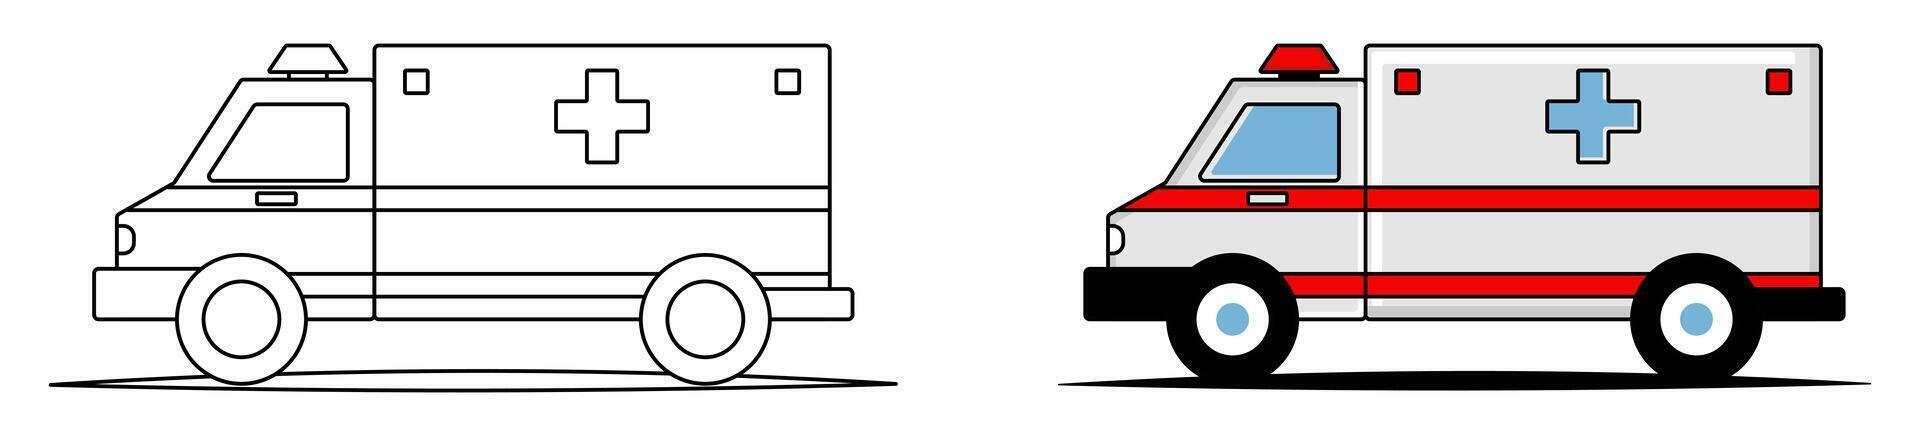 Ambulance Truck Icon. Simple and Modern Vector Isolated on White Background. Design For Apps, Posters, Web, Social Media.